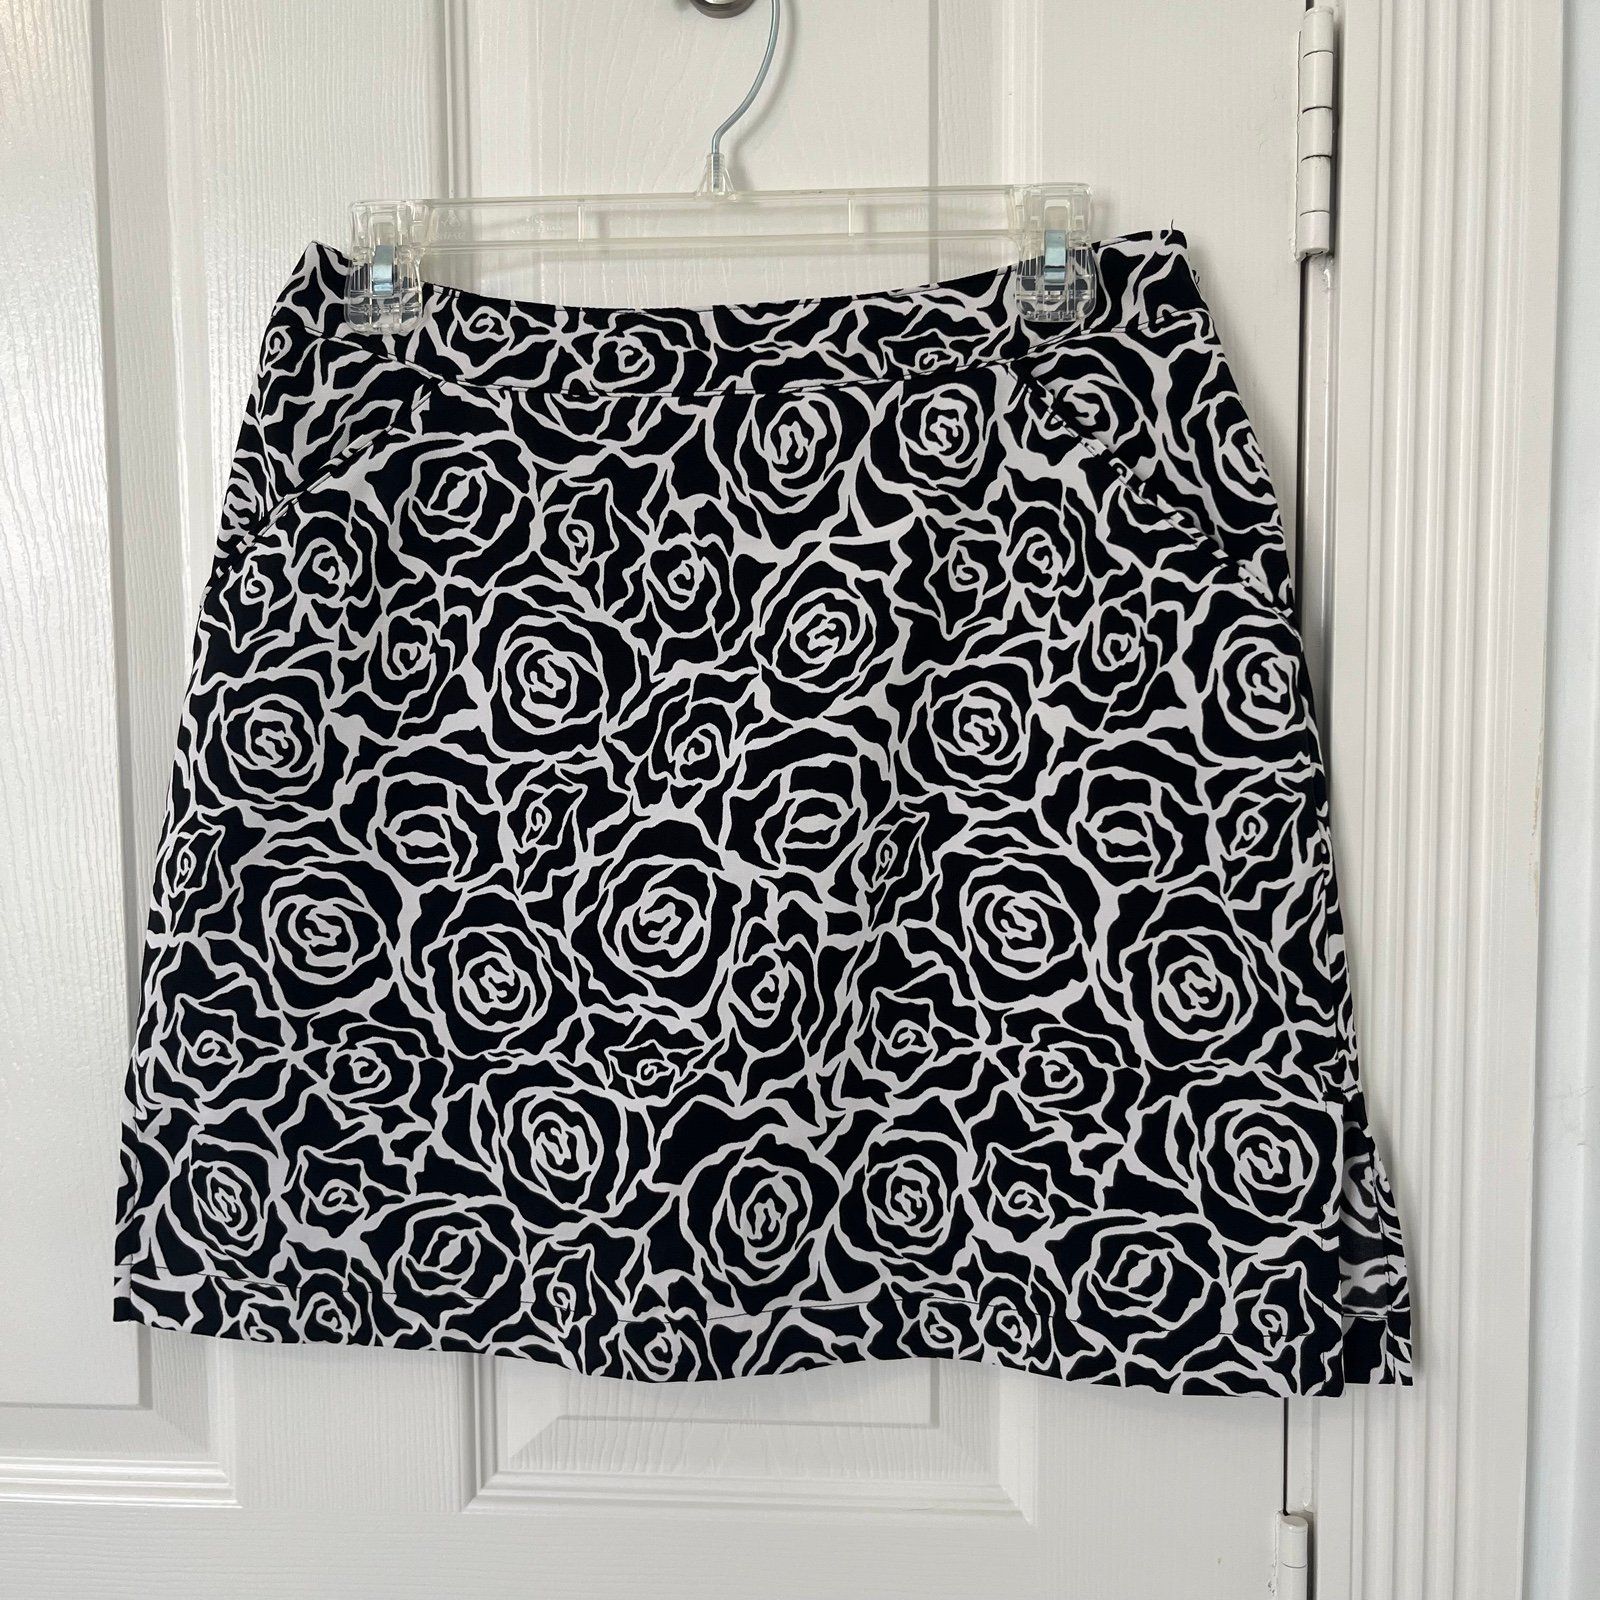 cheapest place to buy  CORAL BAY GOLF Black and White Floral Golf Skort | Size 6 LmkkRQ0mv best sale